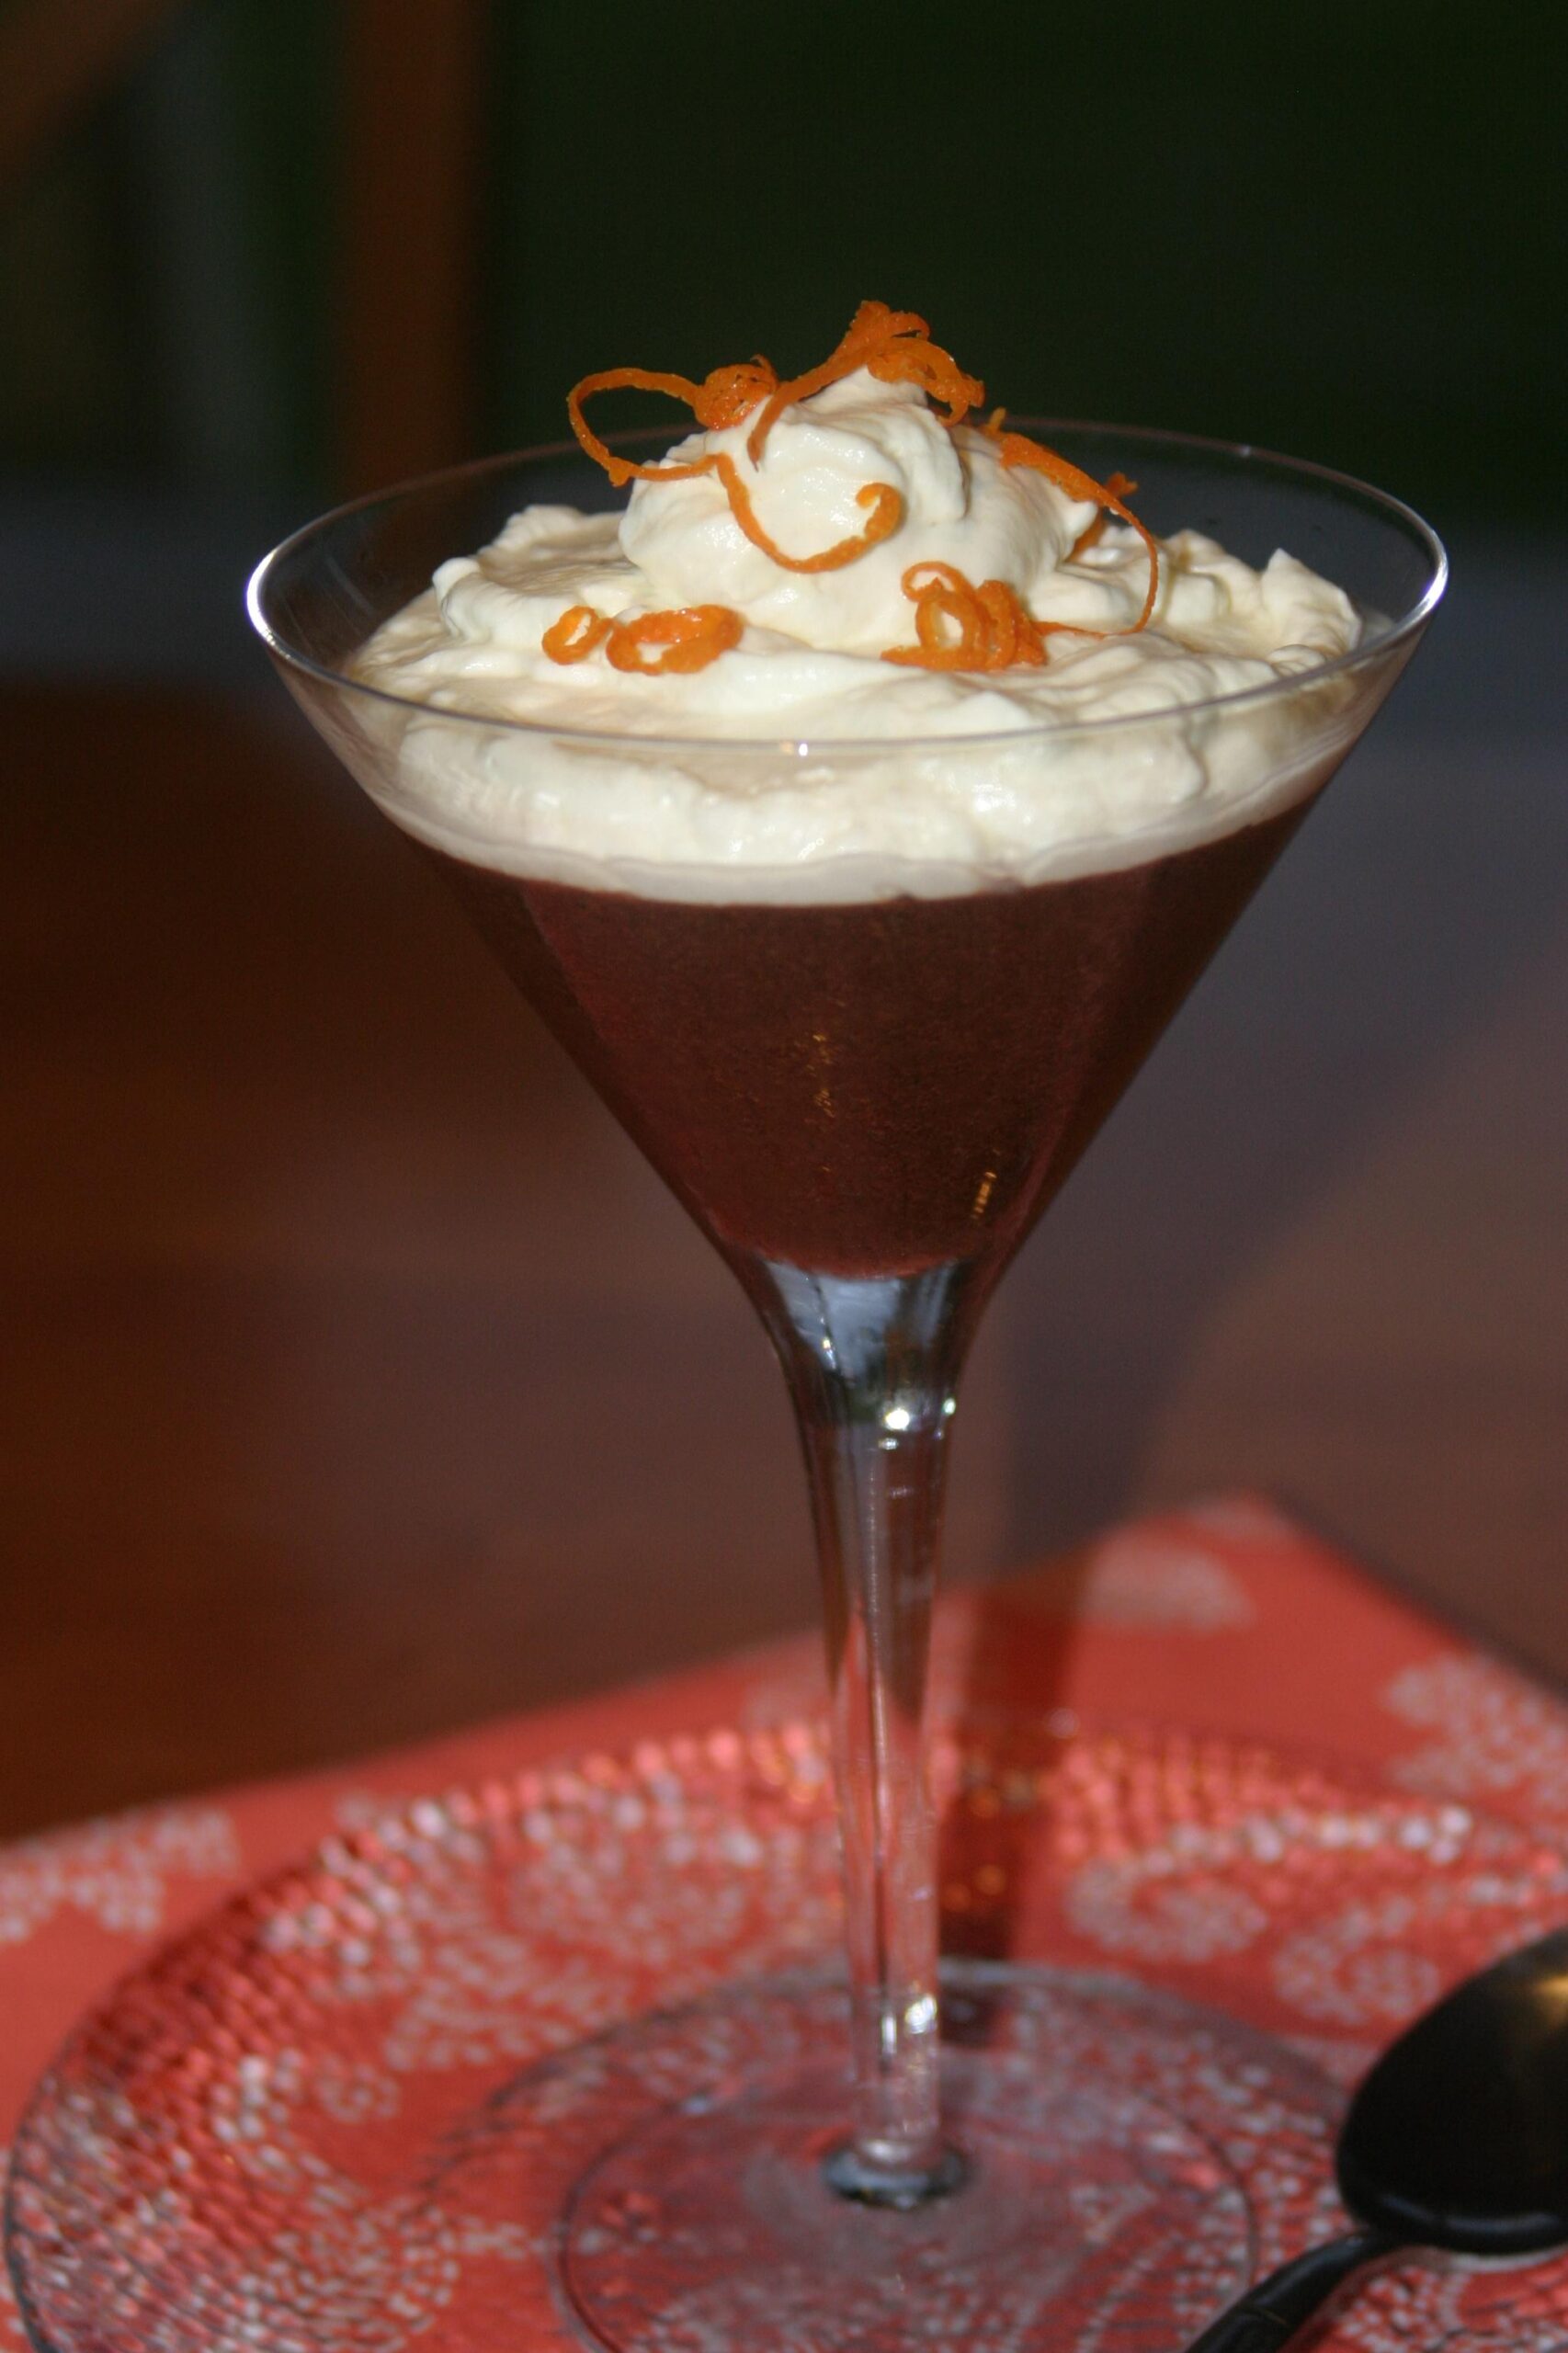 Indulge in Scottish Chocolate and Whiskey Mousse Recipe